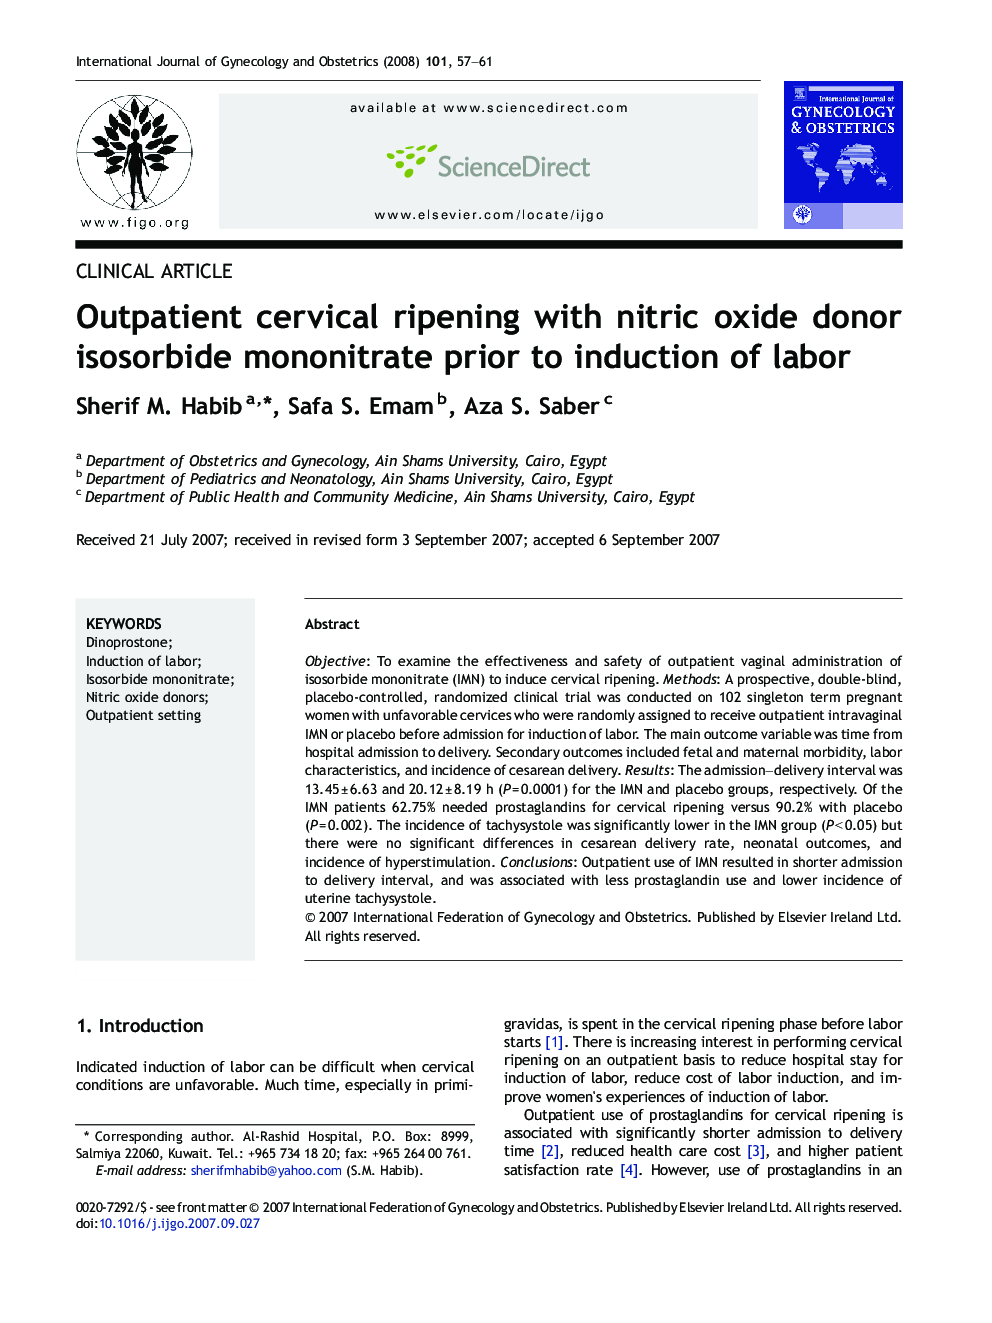 Outpatient cervical ripening with nitric oxide donor isosorbide mononitrate prior to induction of labor